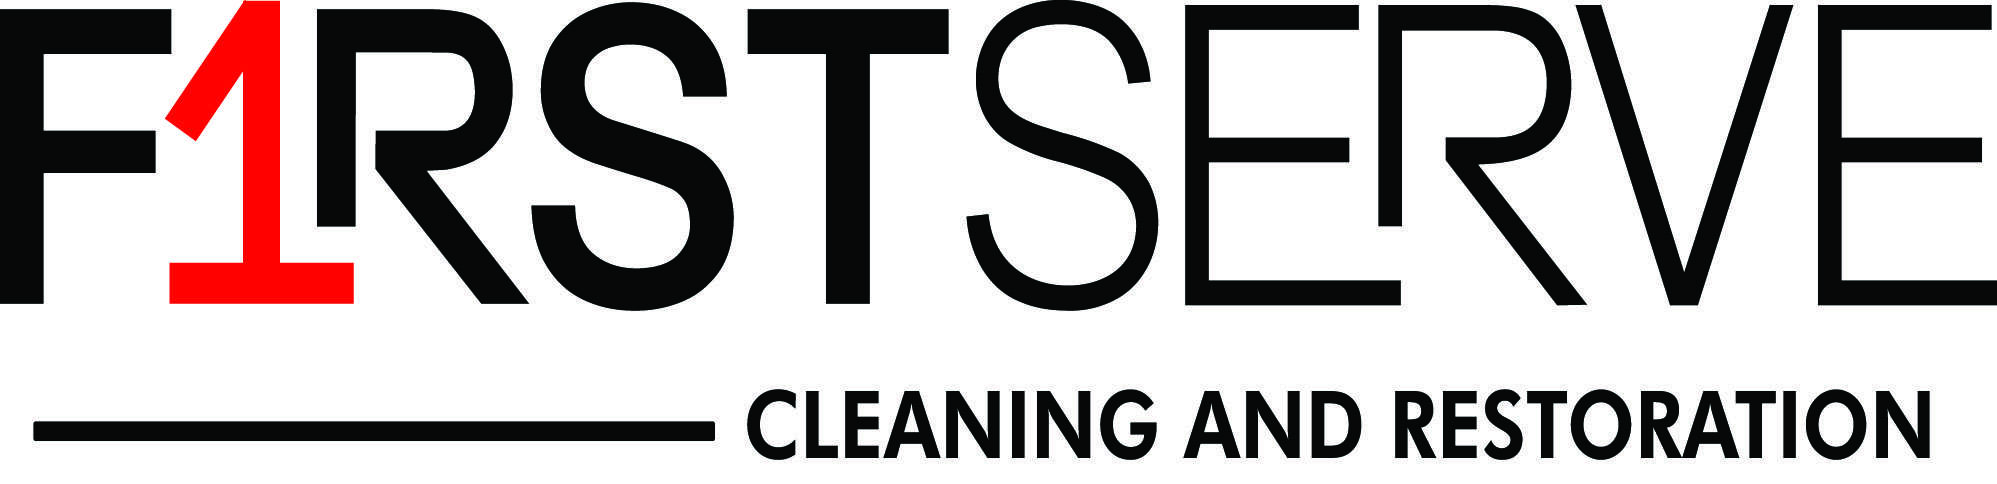 First Serve Cleaning and Restoration Logo